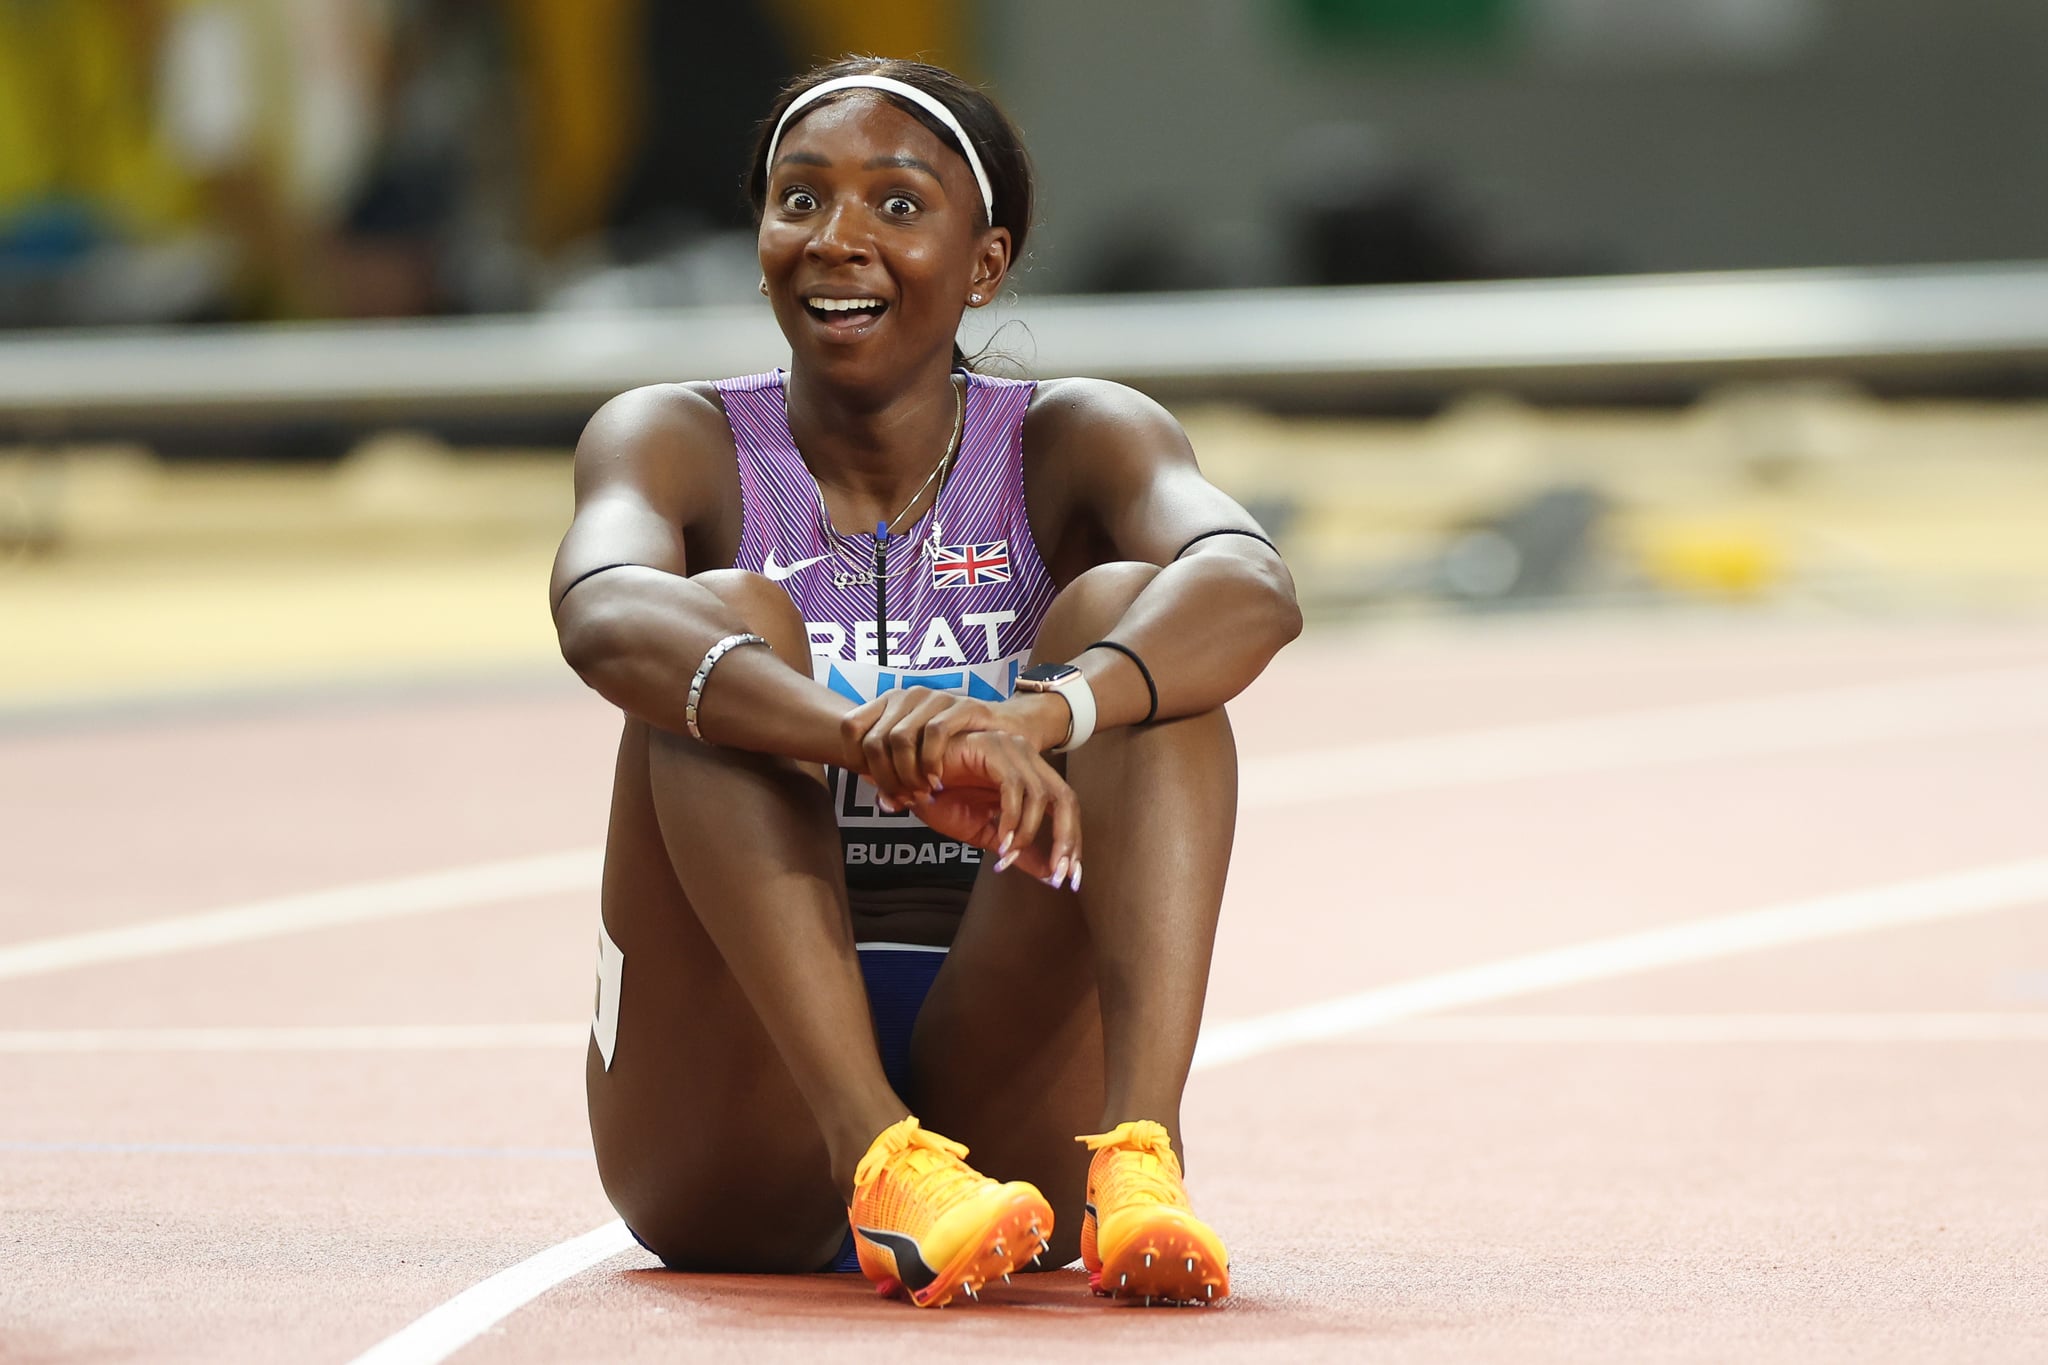 BUDAPEST, HUNGARY - AUGUST 24: Bianca Williams of Team Great Britain reacts after competing in the Women's 200m Semi-Final during day six of the World Athletics Championships Budapest 2023 at National Athletics Centre on August 24, 2023 in Budapest, Hungary. (Photo by Steph Chambers/Getty Images)